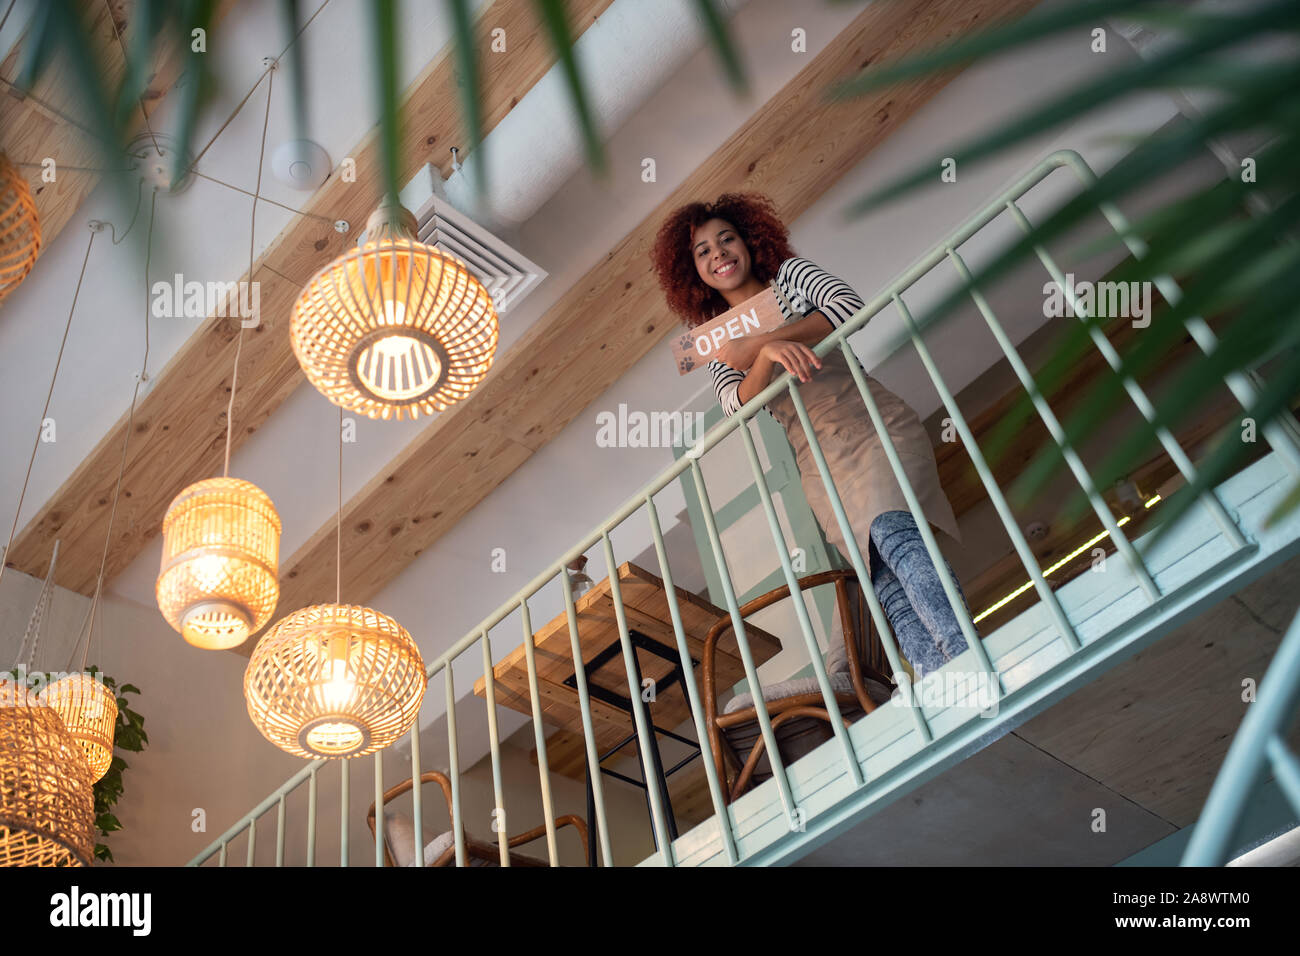 Curly red-haired entrepreneur opening little coffee shop Stock Photo